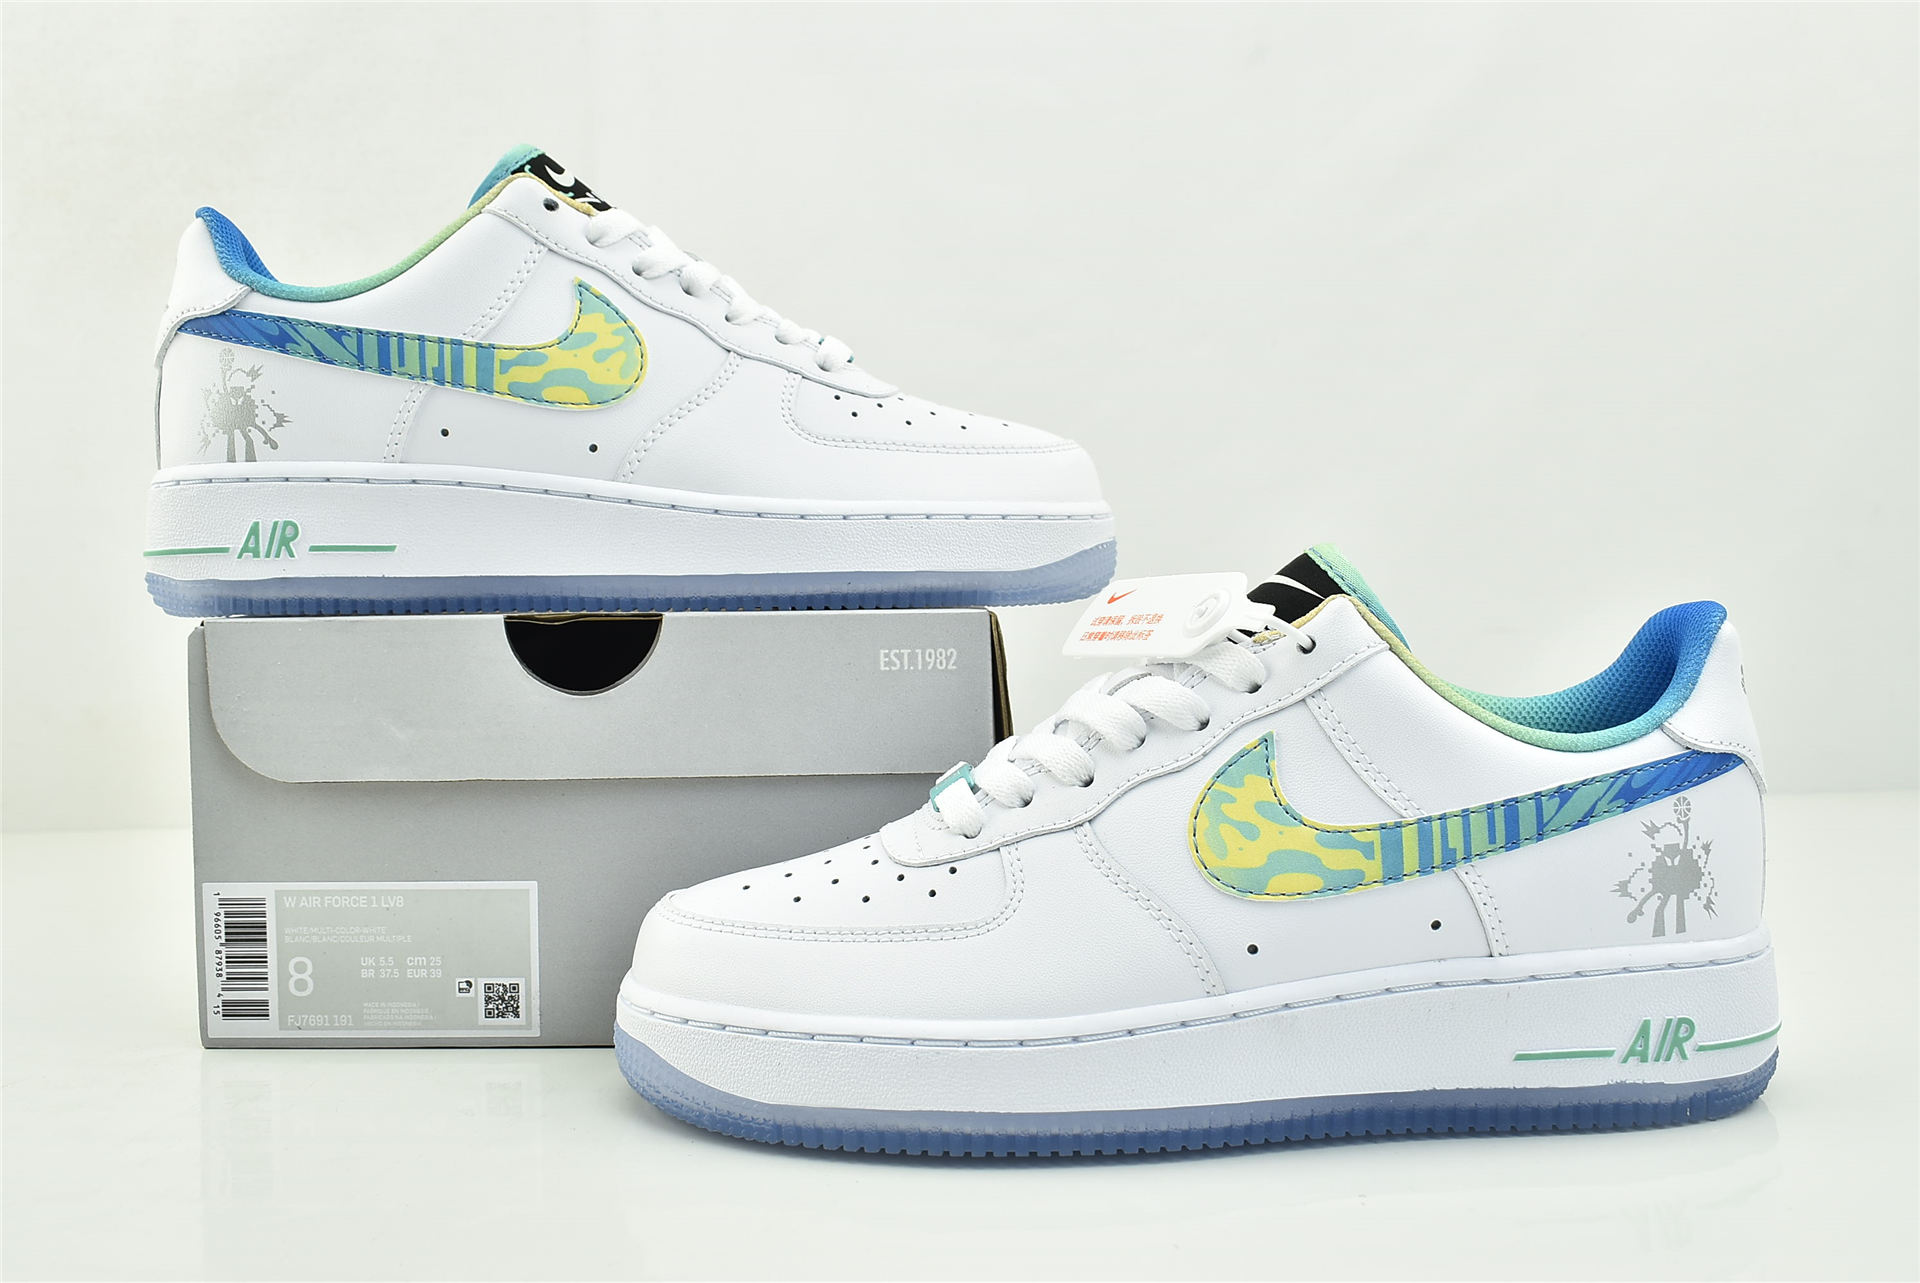 NIKE AIR FORCE 1 LOW – “UNLOCK YOUR SPACE”